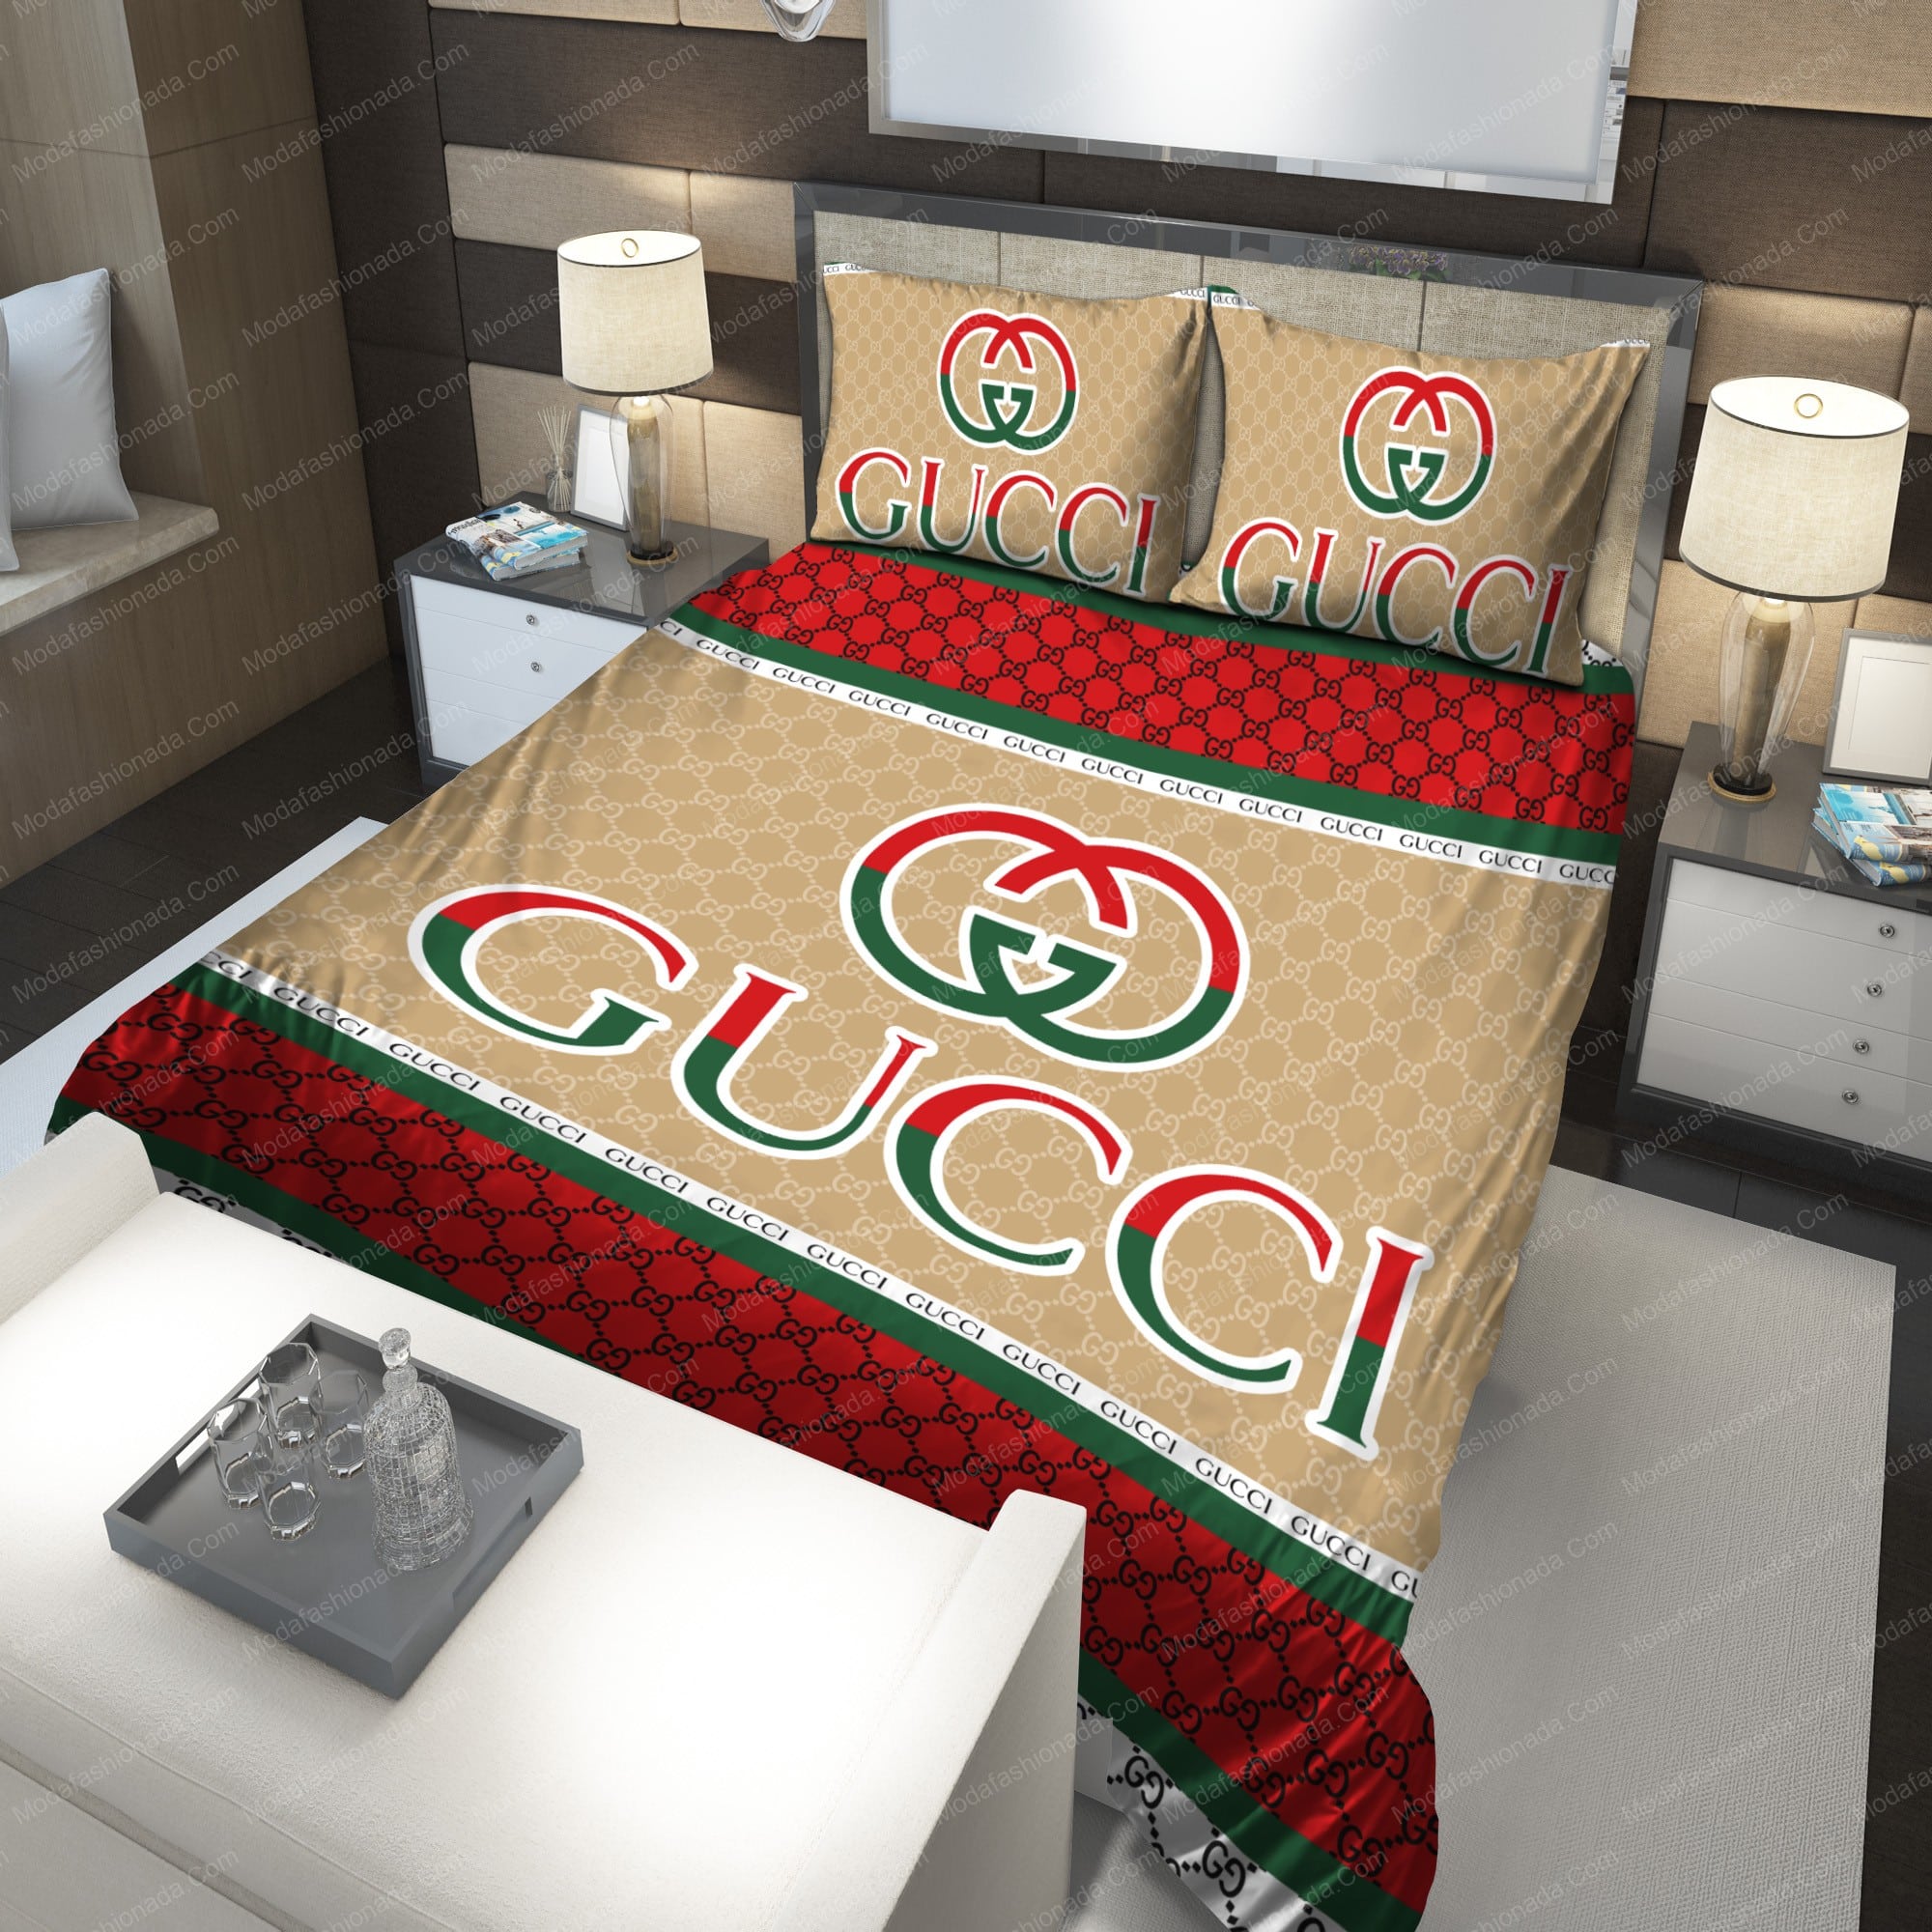 Wrap Yourself in Luxury with Gucci Blanket – MY luxurious home